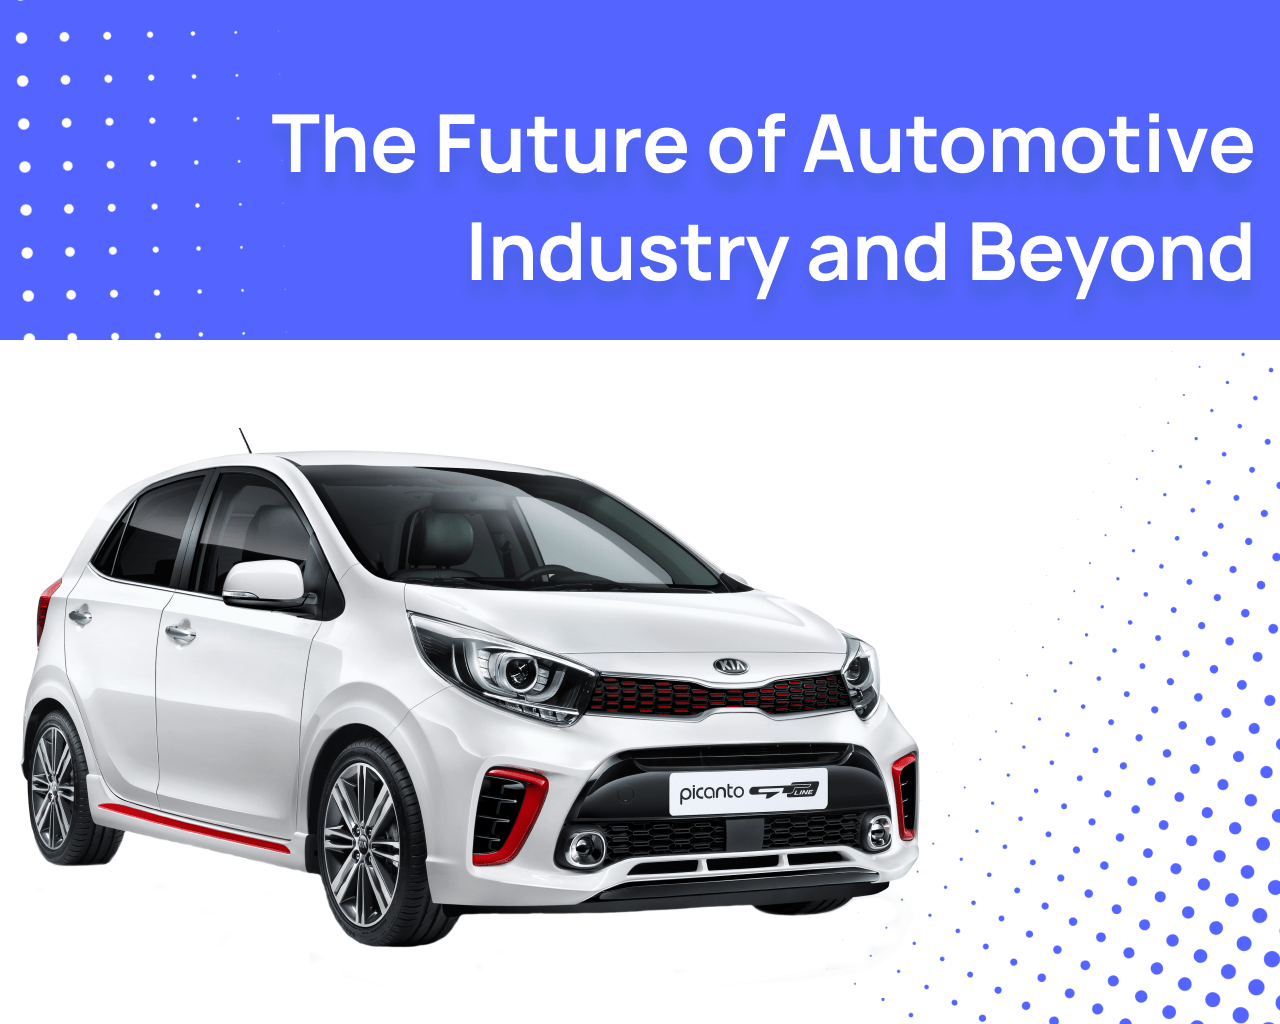 The Future of Automotive Mobility